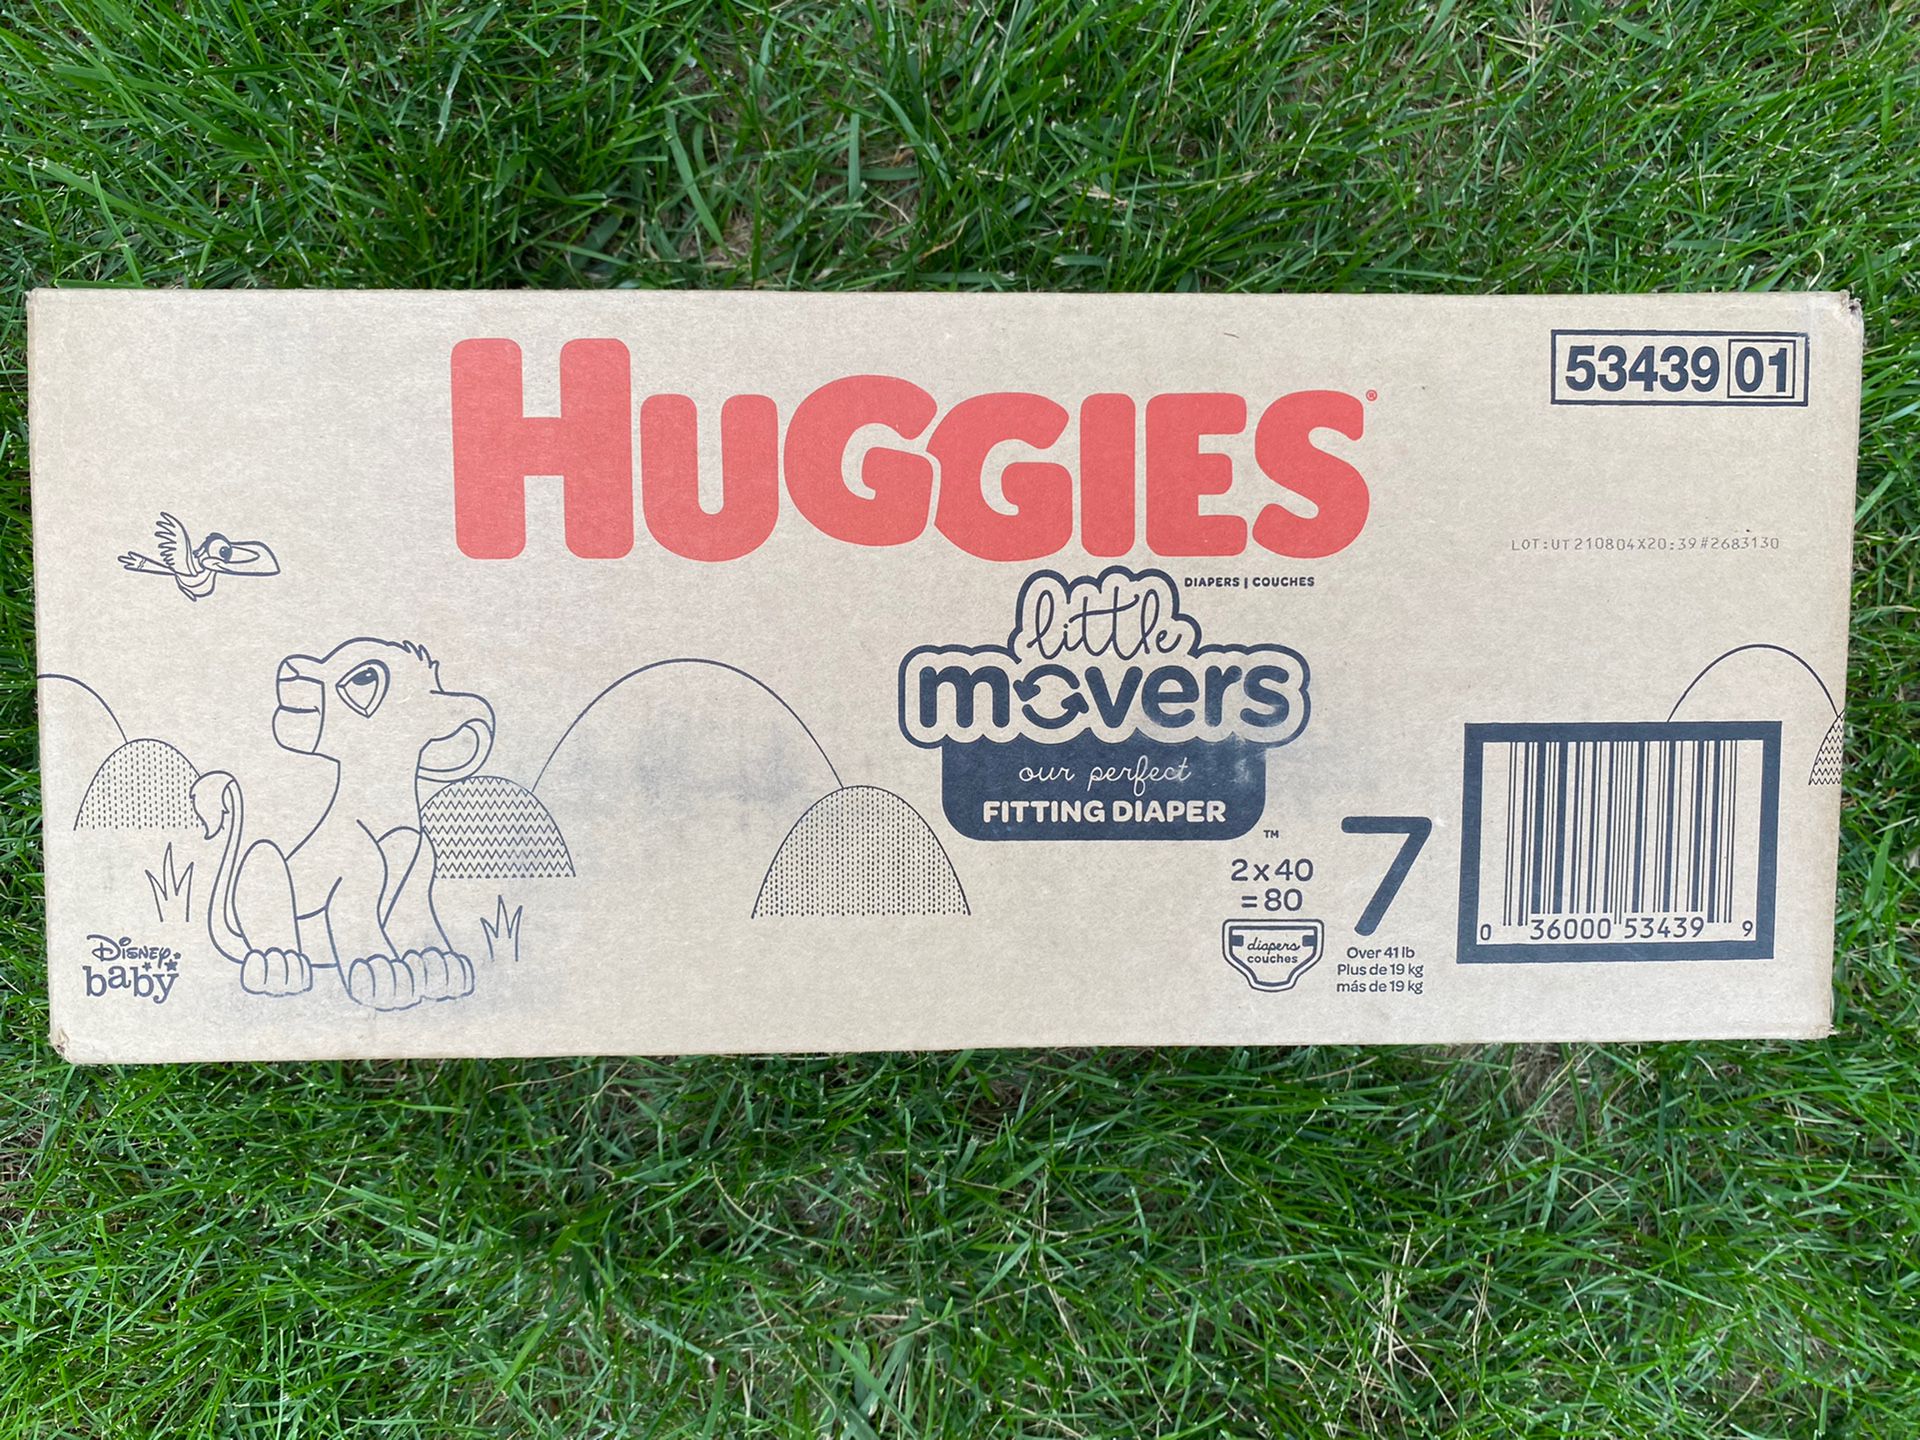 Huggies Little movers size 7